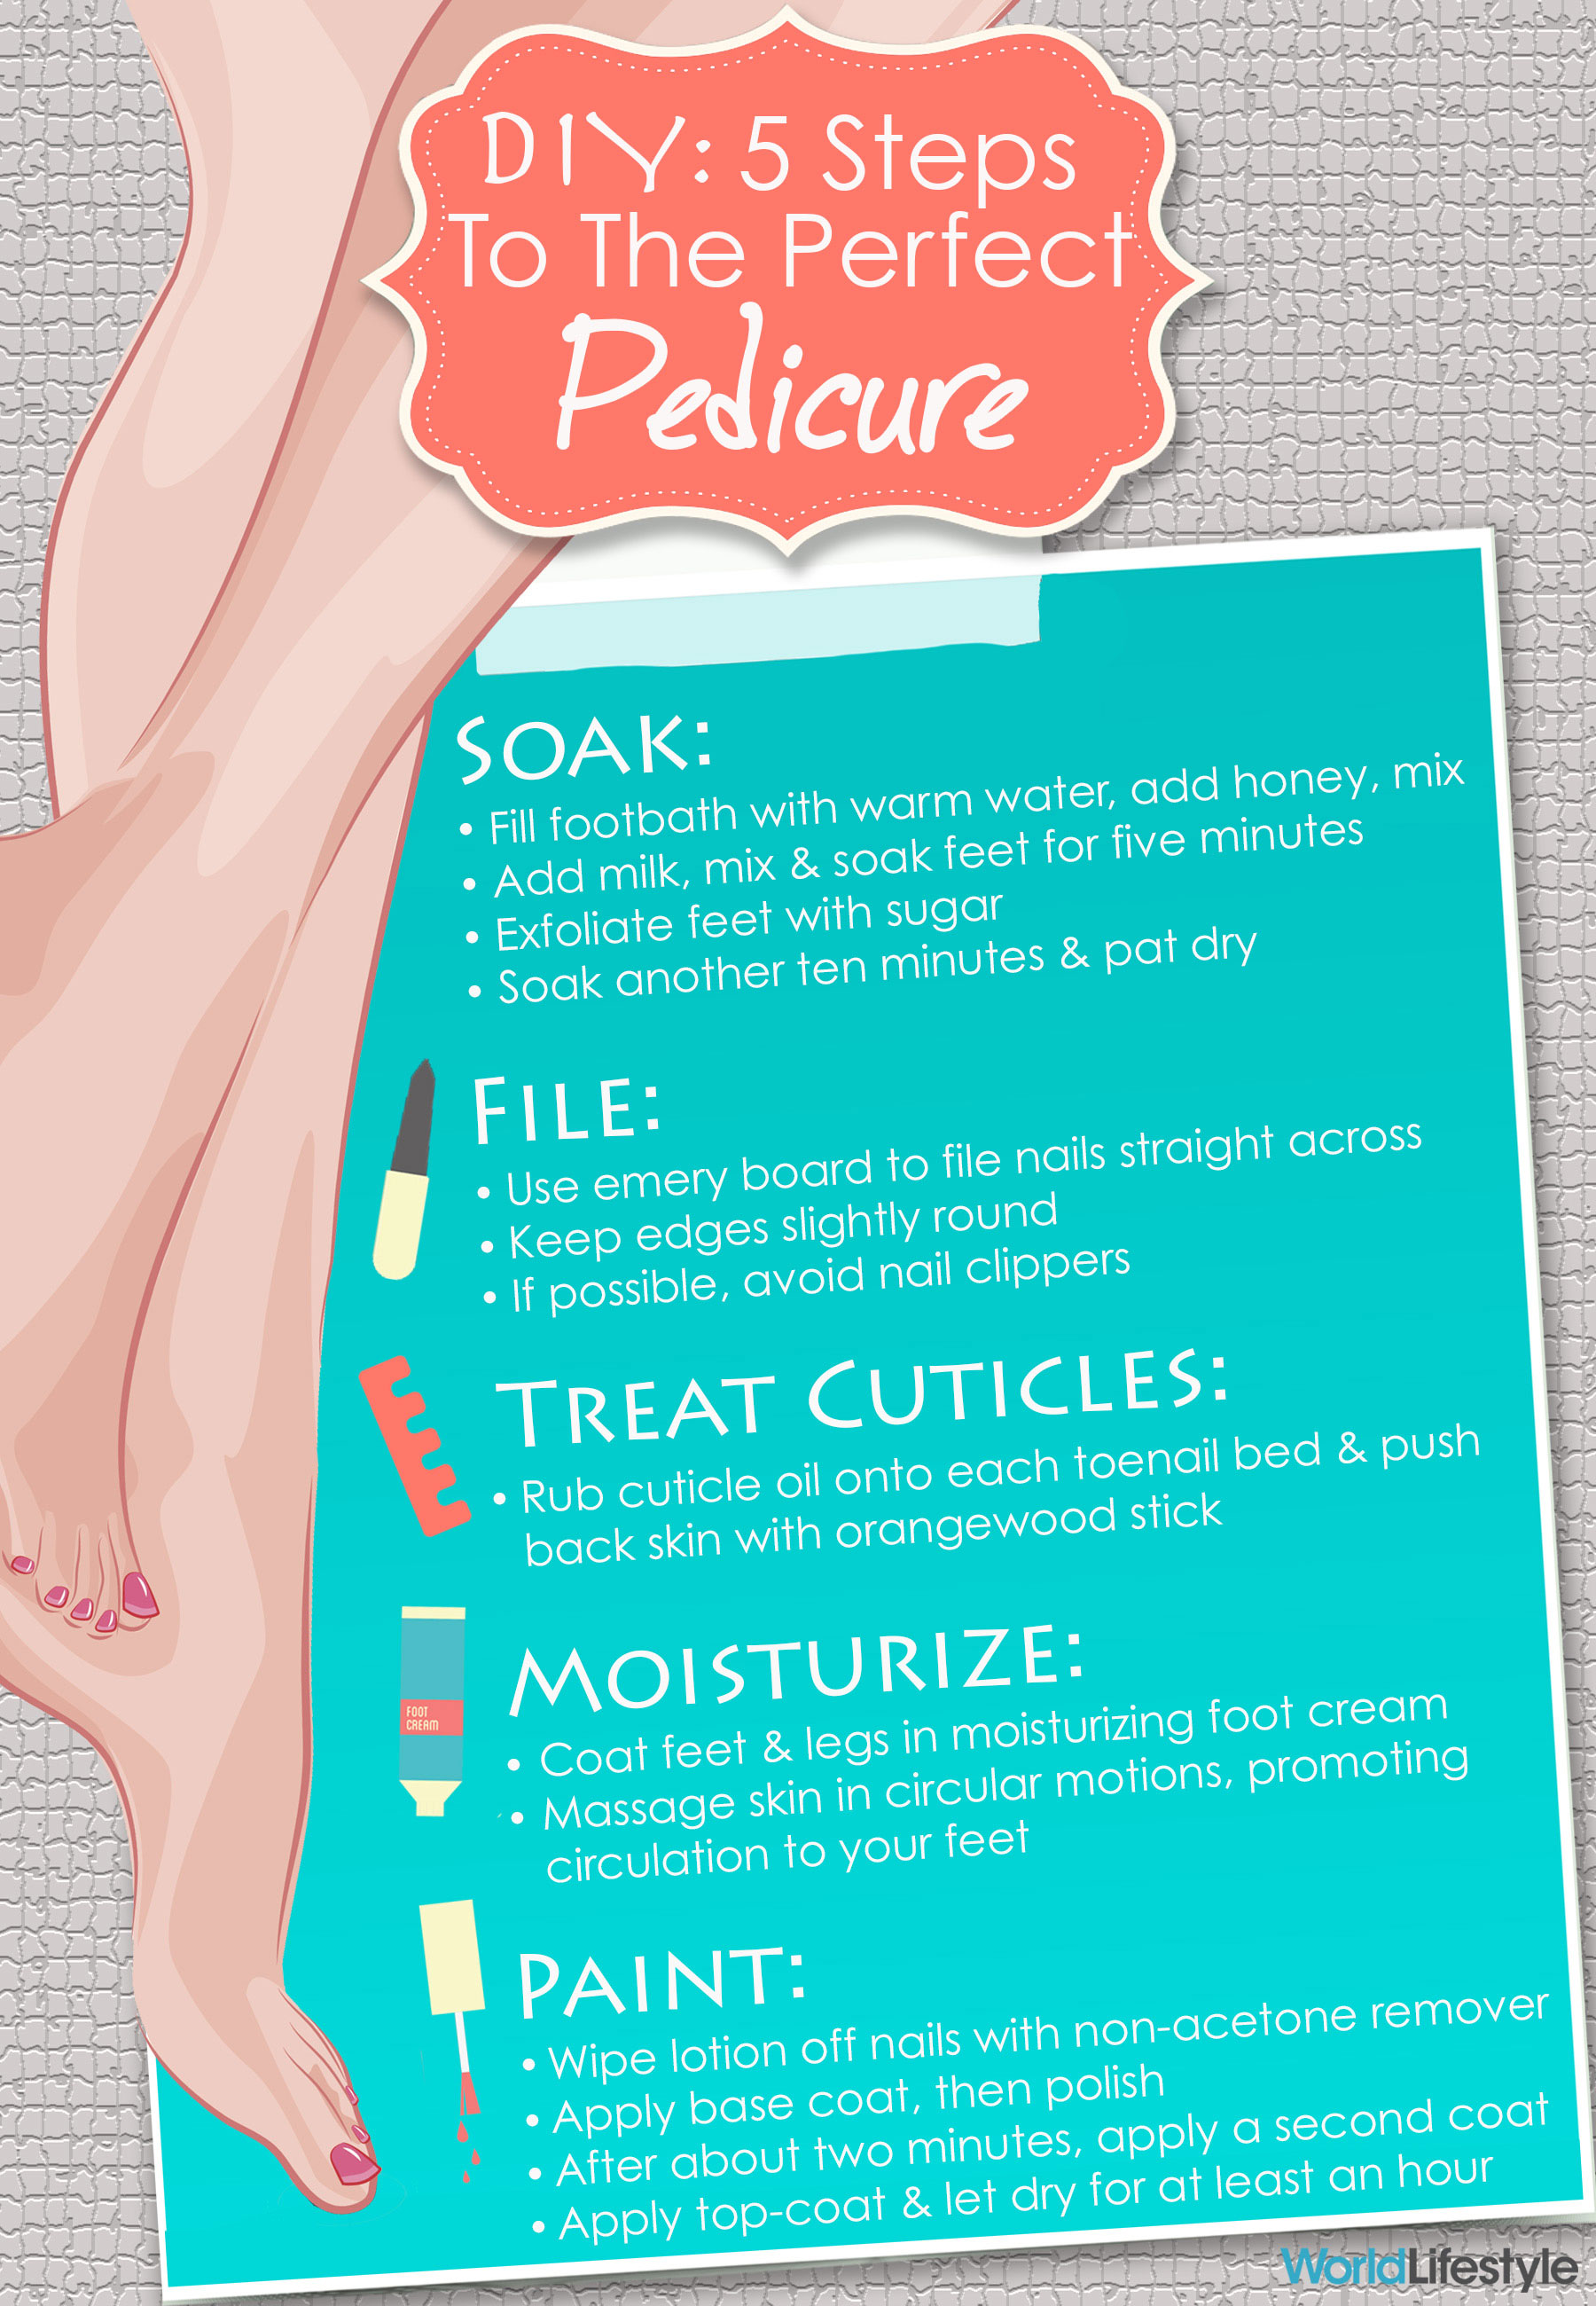 https://i.visual.ly/images/diy-five-steps-to-the-perfect-pedicure_535806f25cf4e.jpg